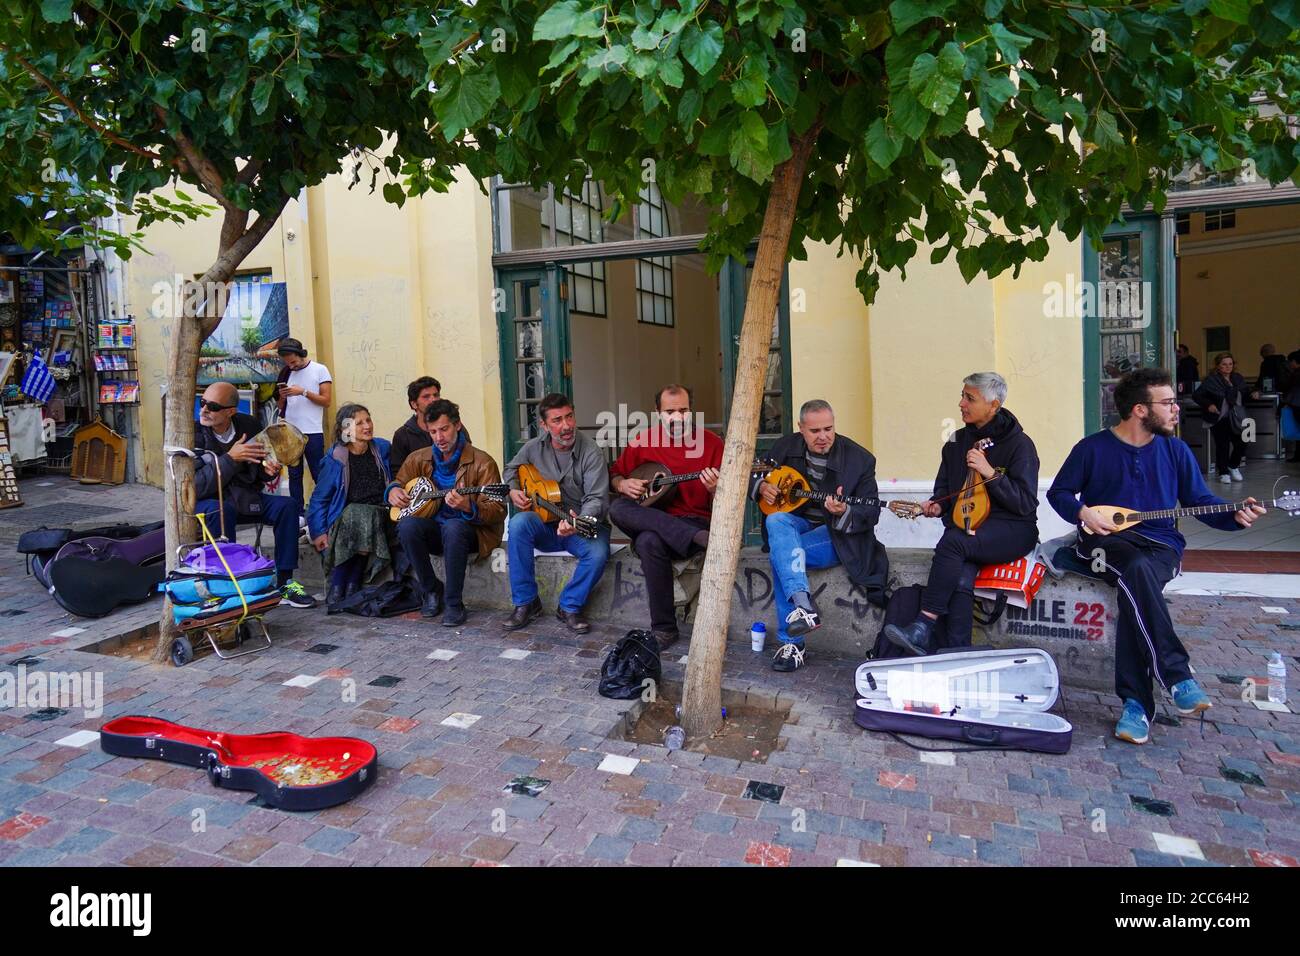 A band plays in the street for money Photographed in Athens, Greece Stock Photo